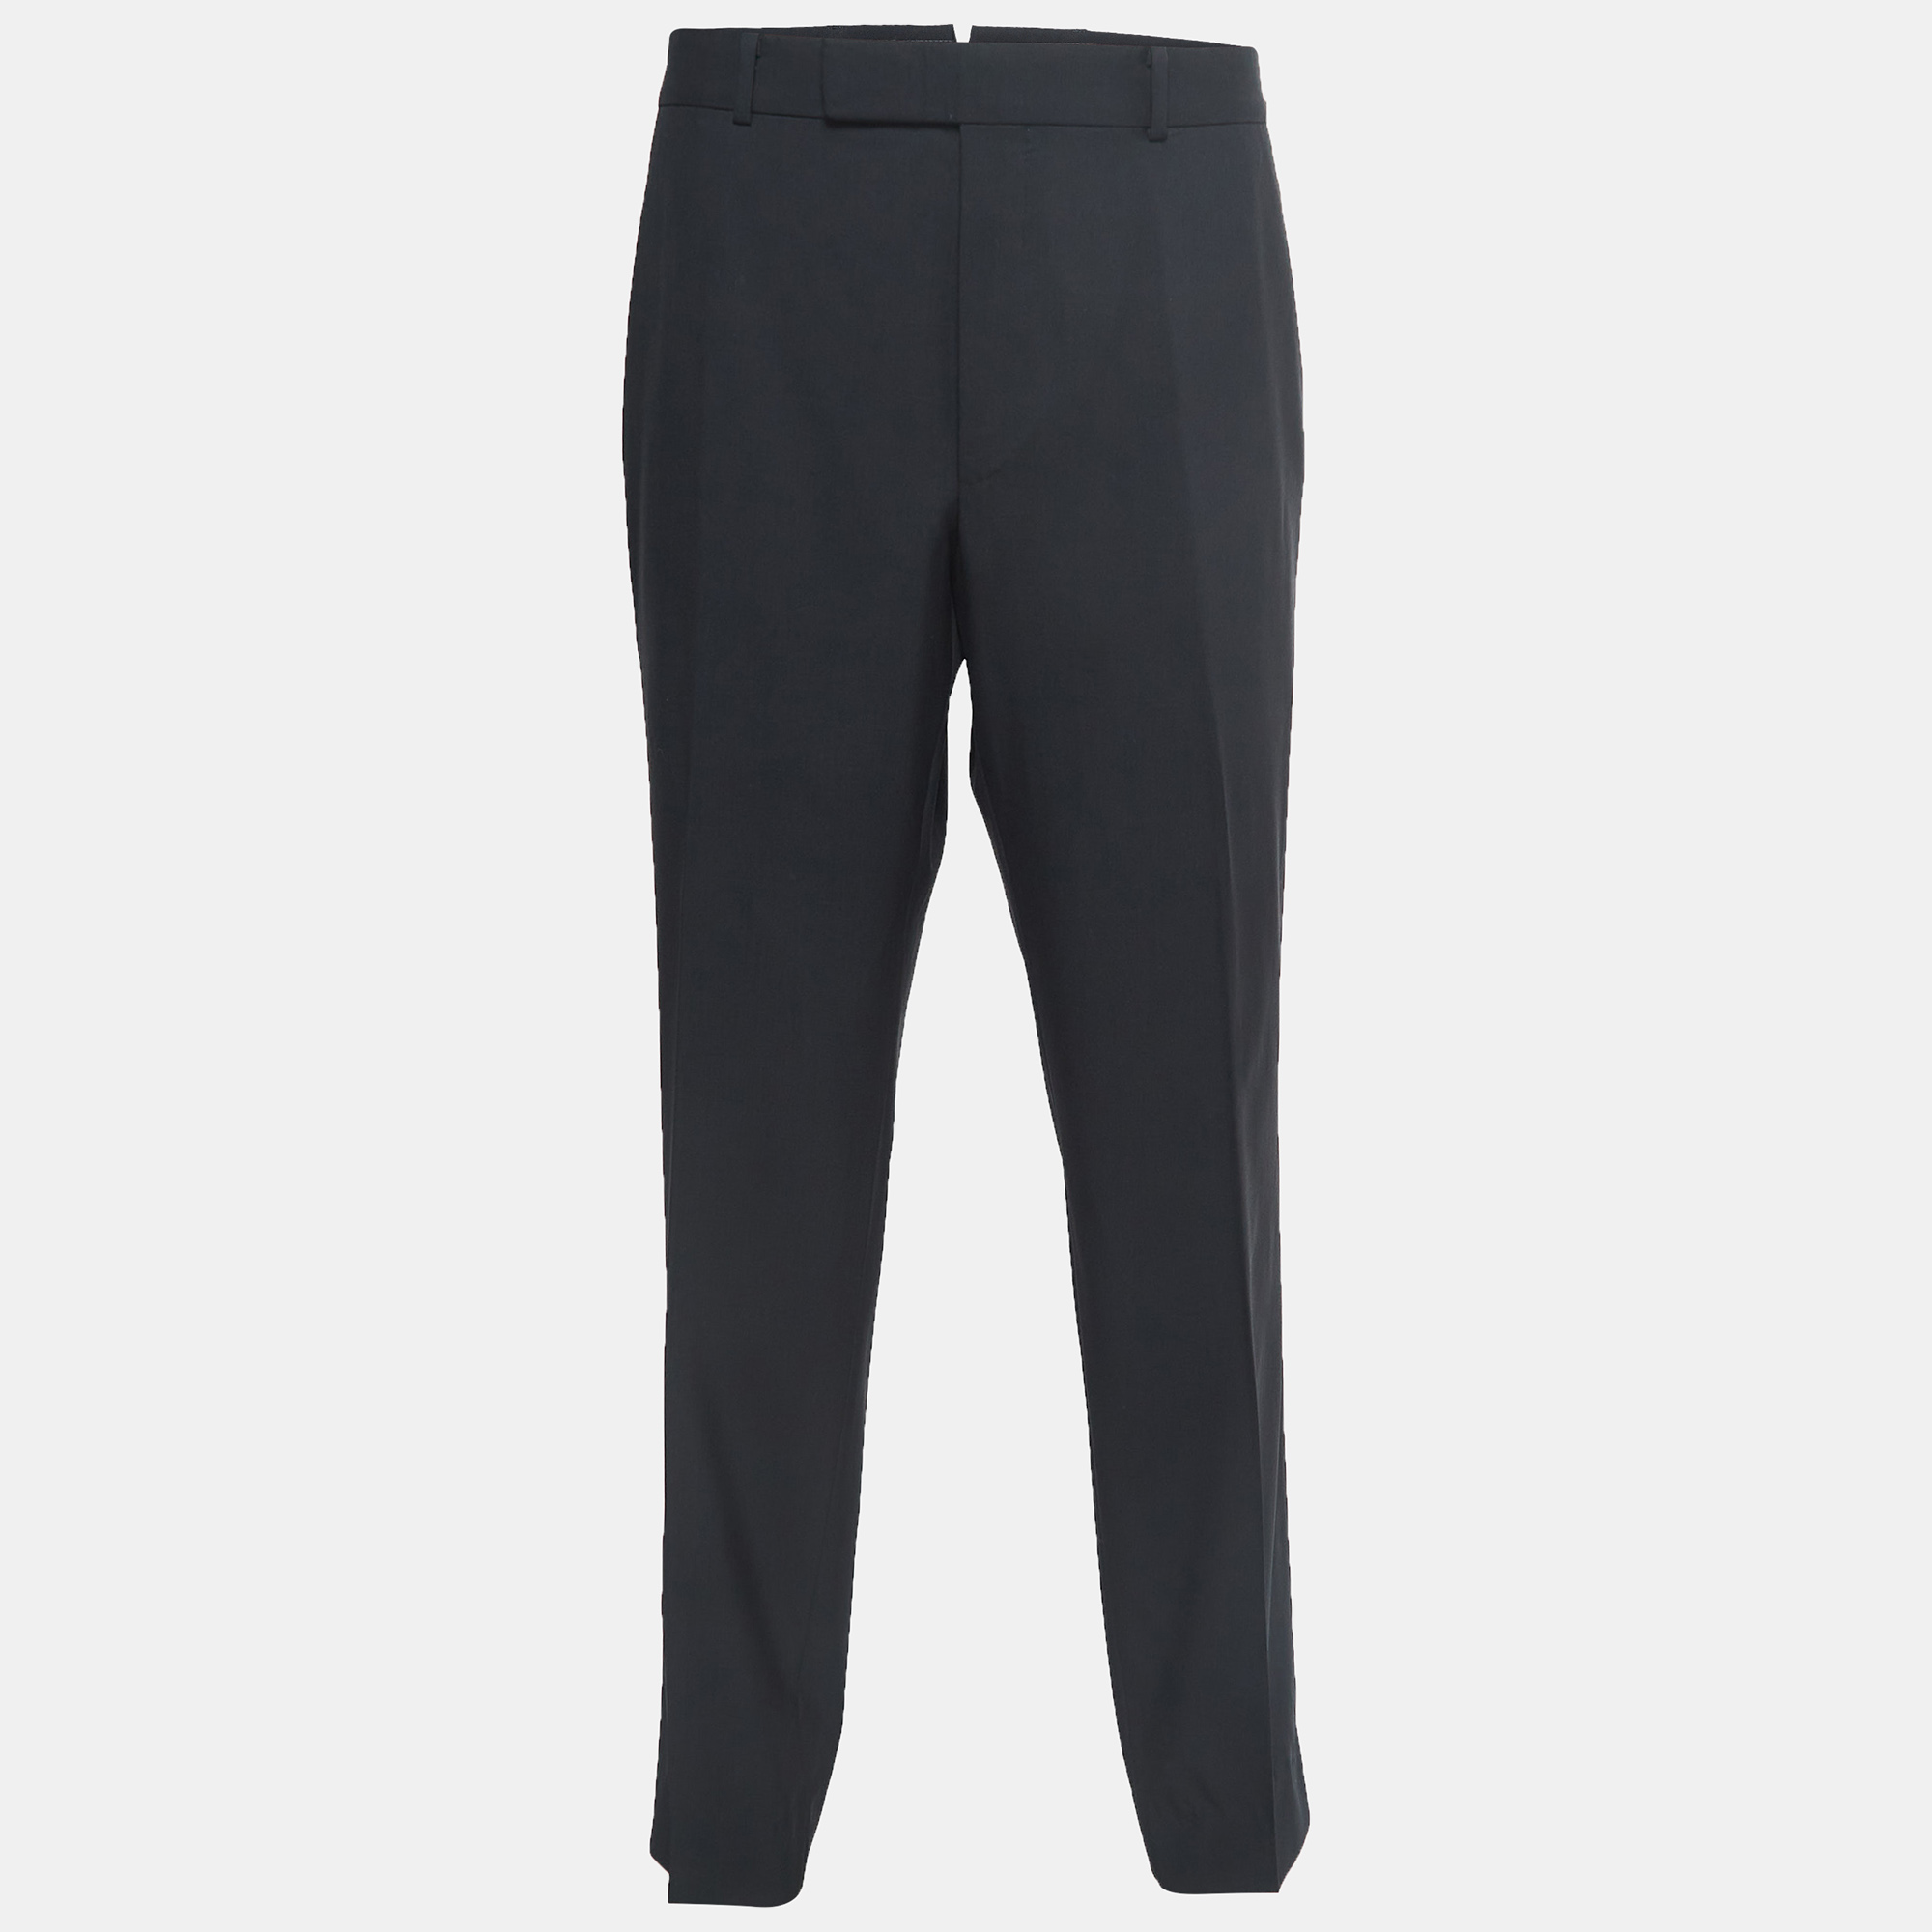 Tom Ford Black Wool Regular Fit Tailored Trousers 3XL